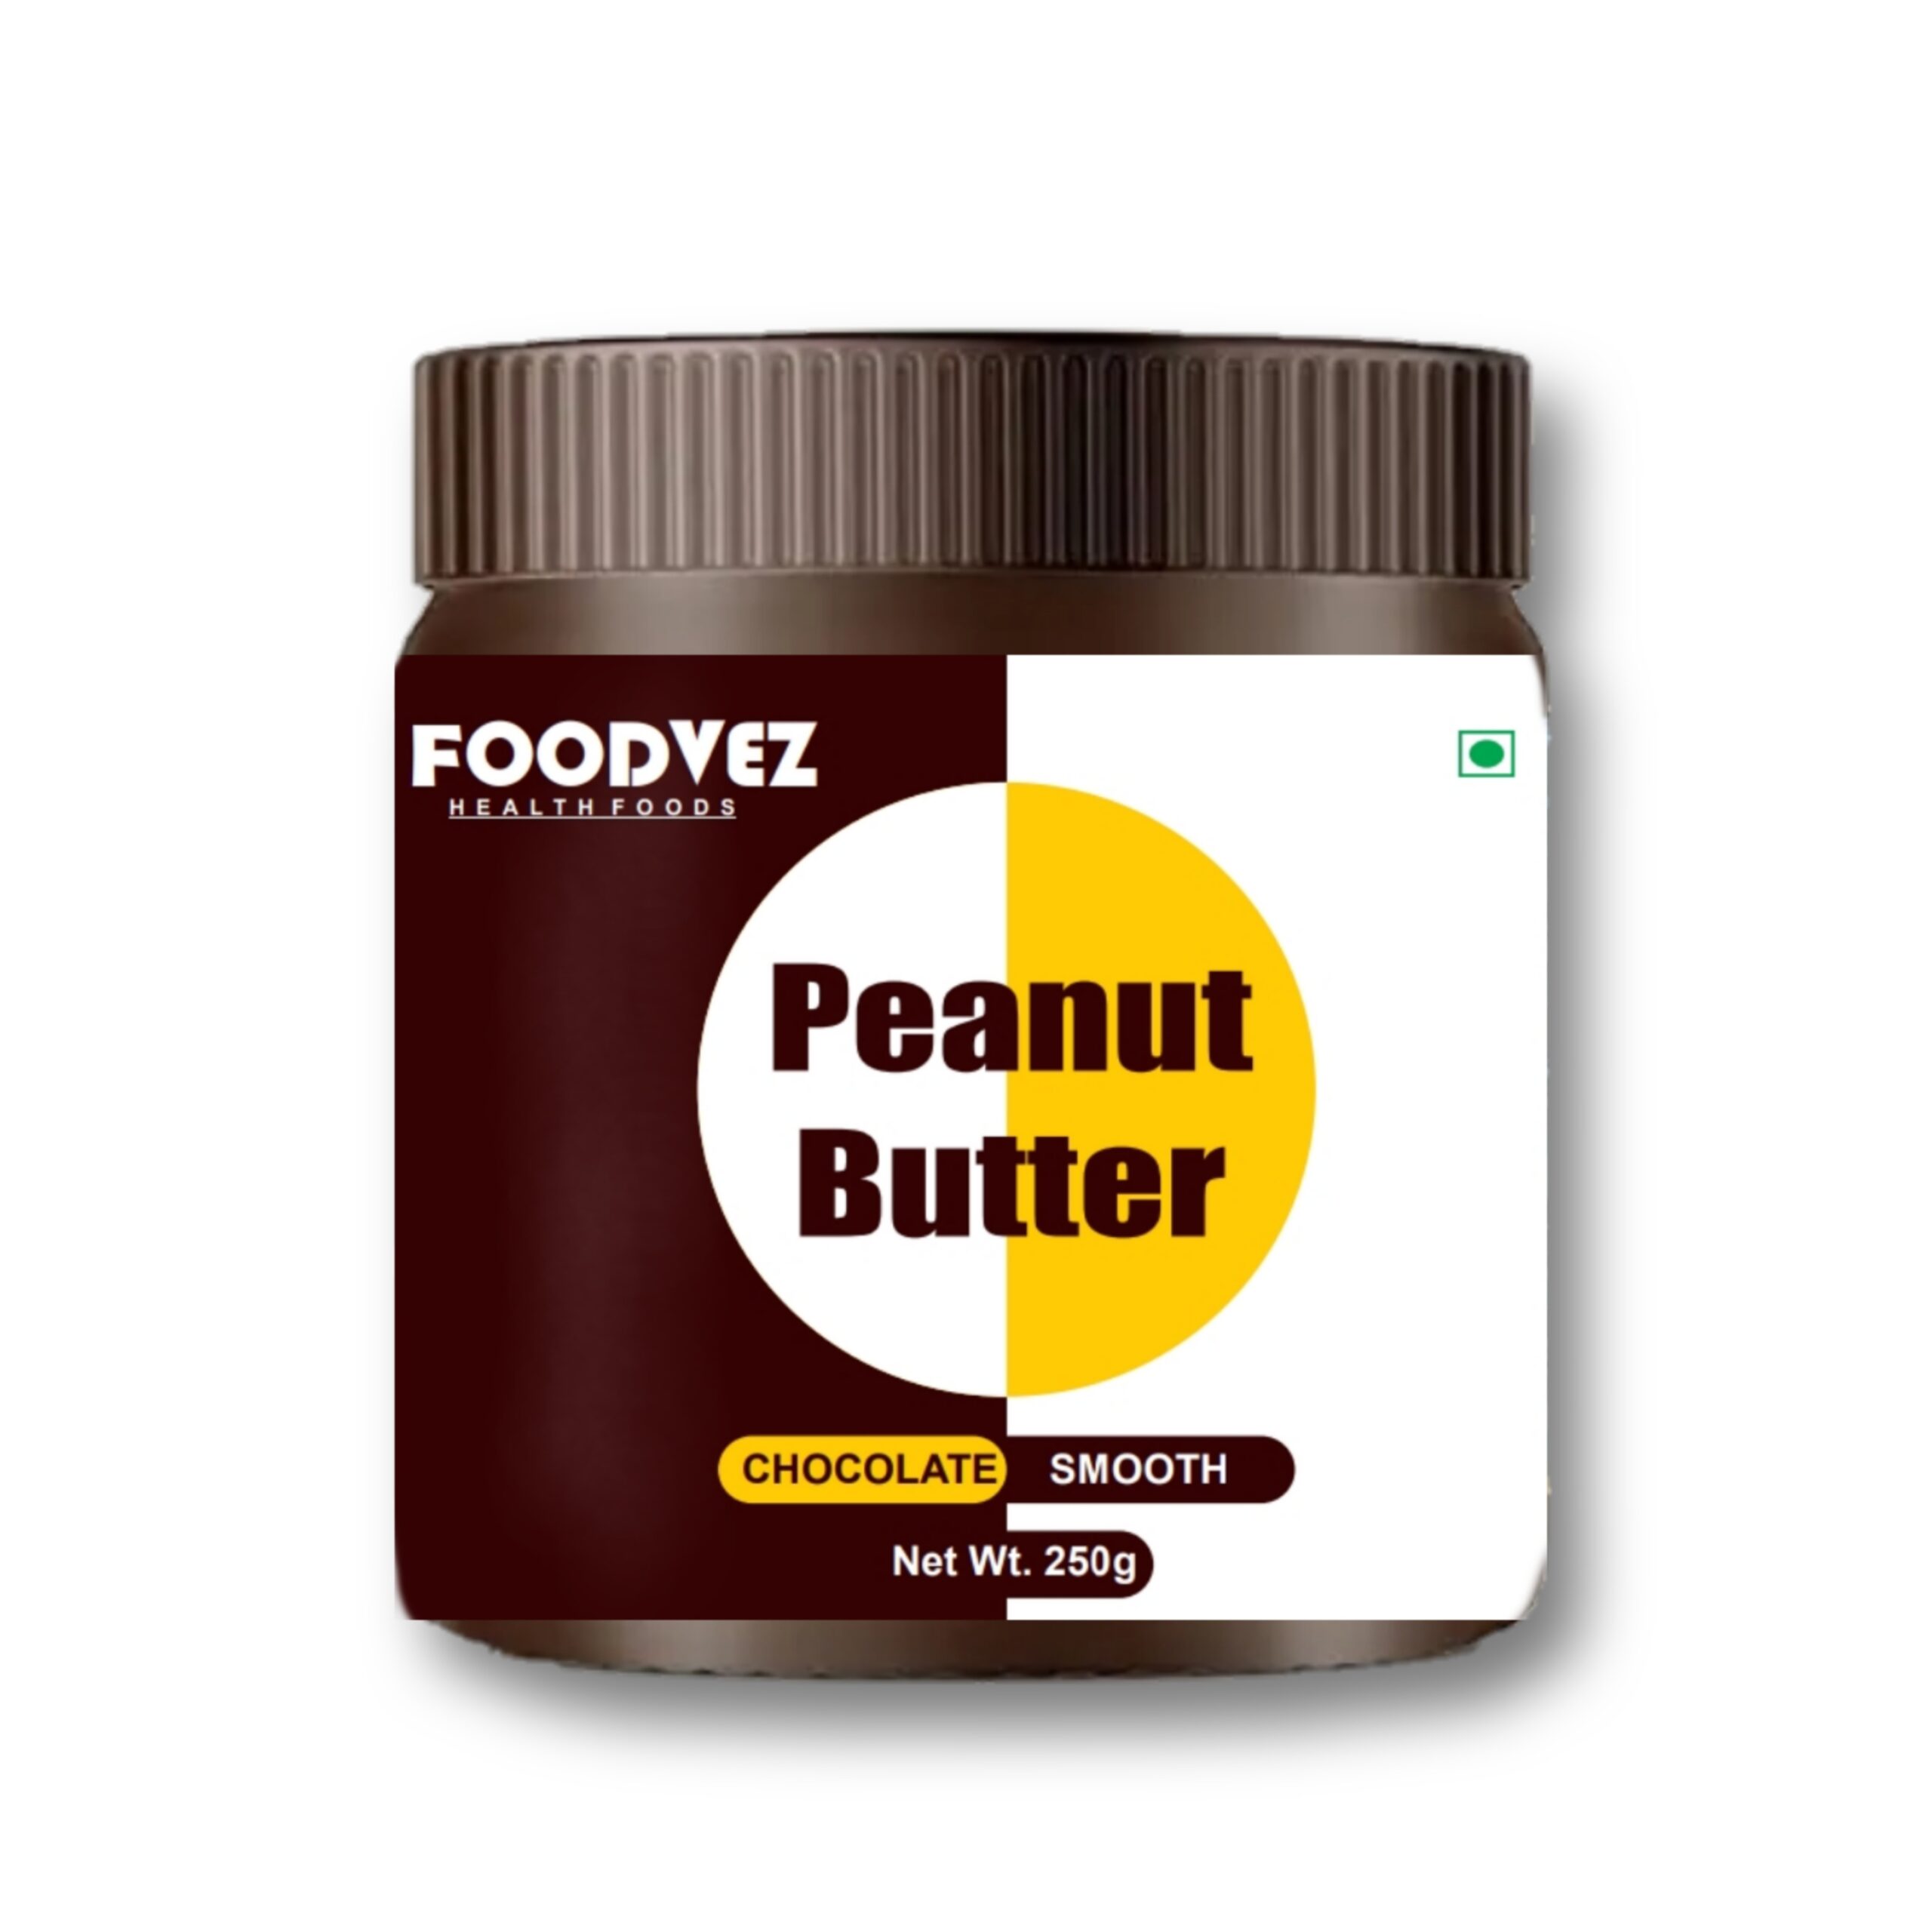 Foodvez Chocolate Smooth Peanut Butter 250g